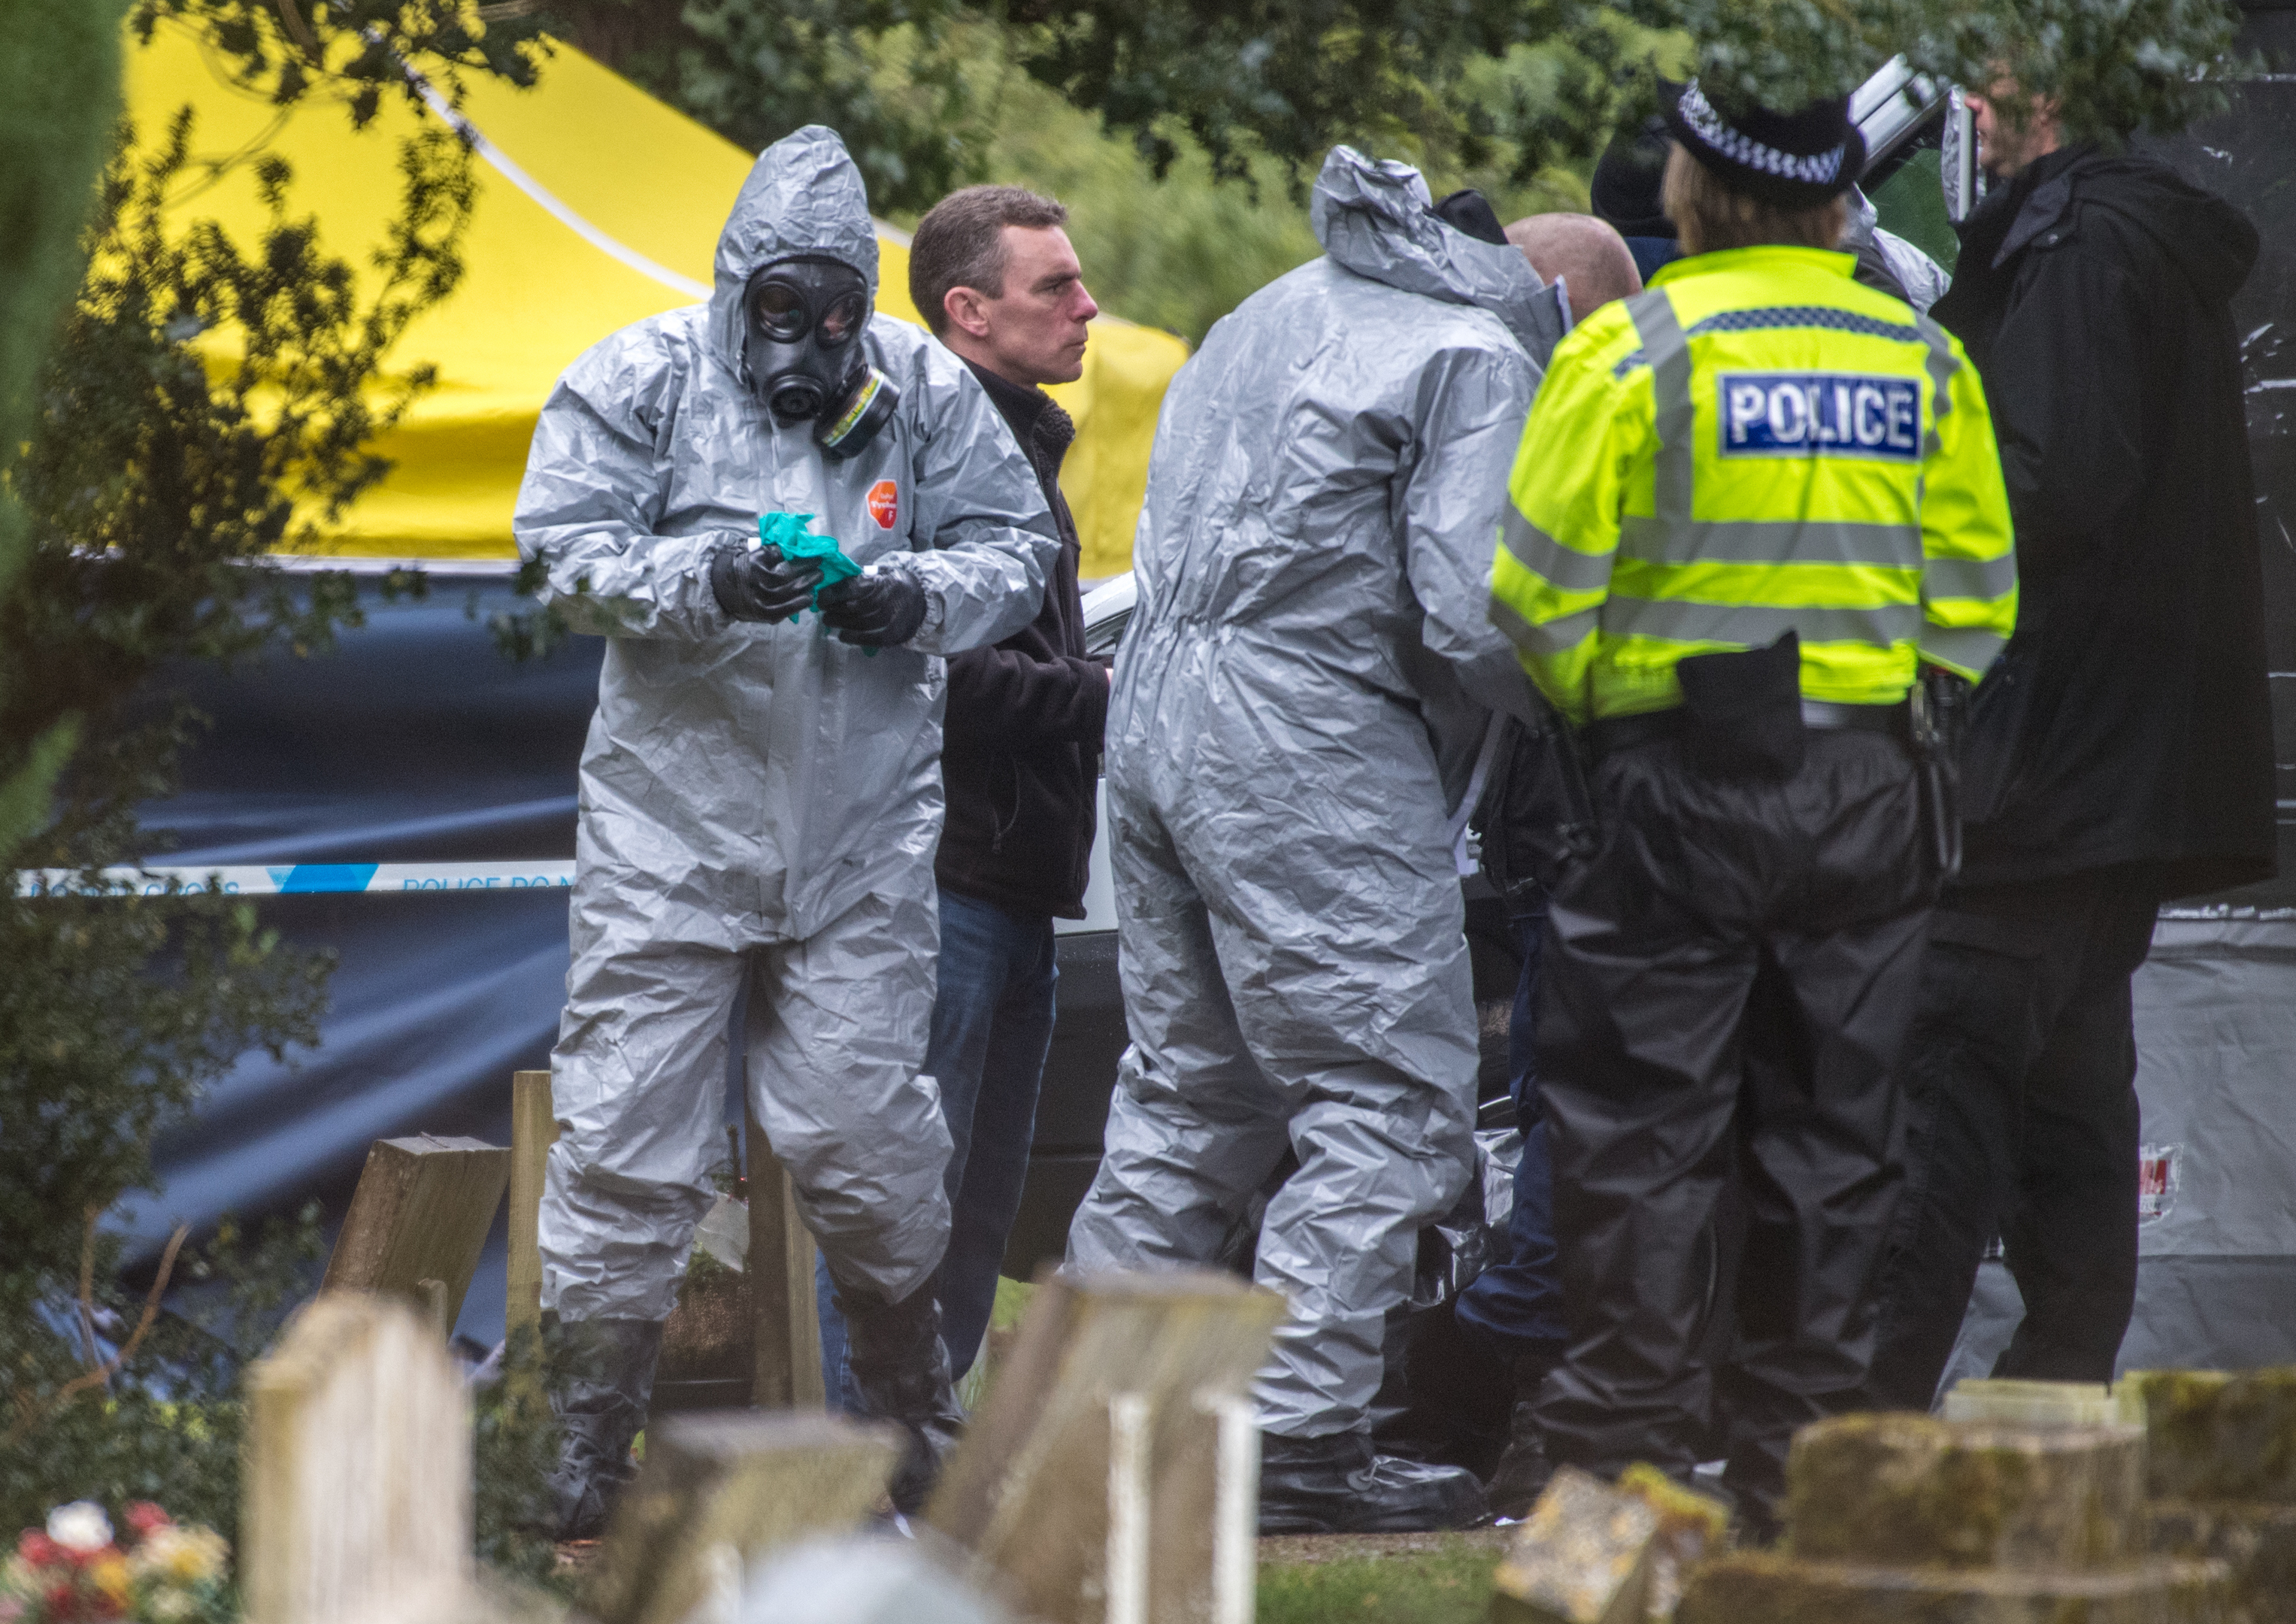 Investigators at the scene (Chris J Ratcliffe/Getty Images)